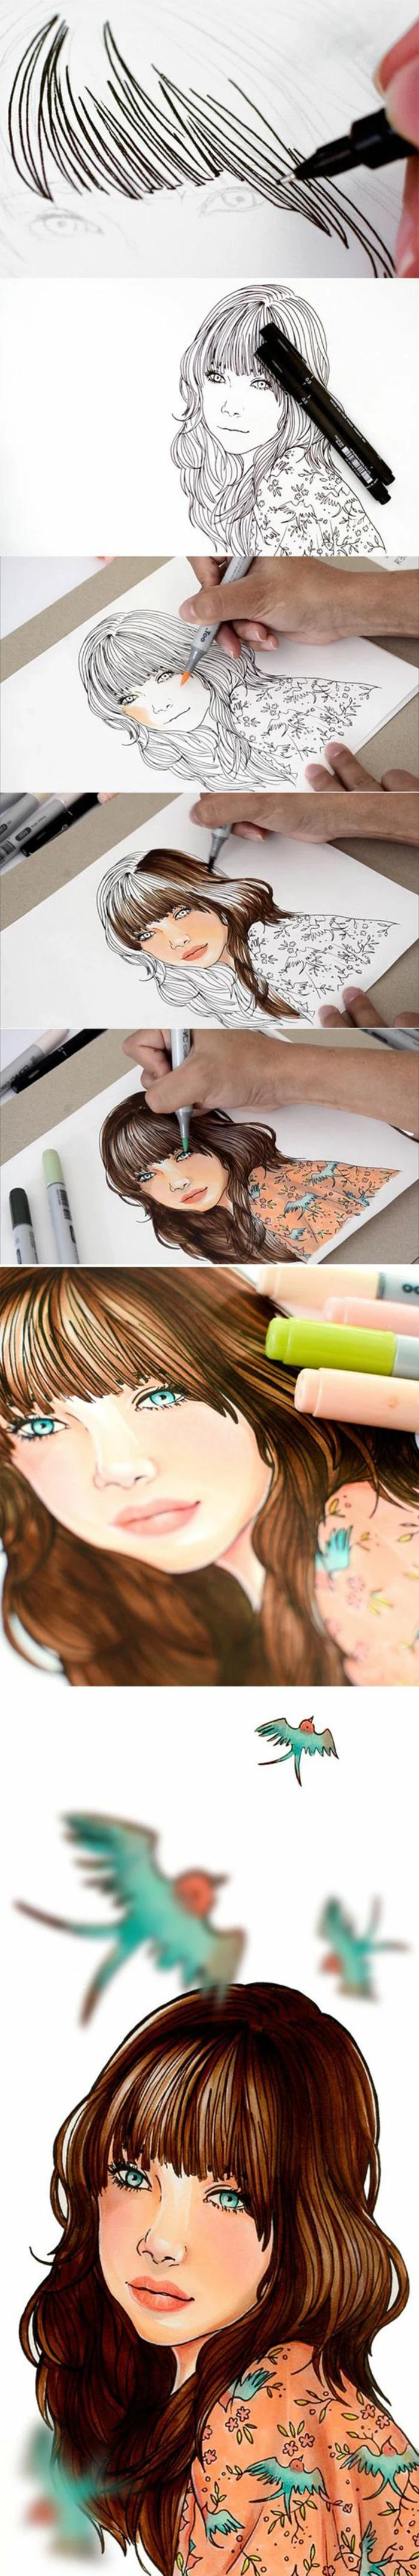 step by step tutorial, how to draw a girl, long brown hair with bangs, floral shirt with birds